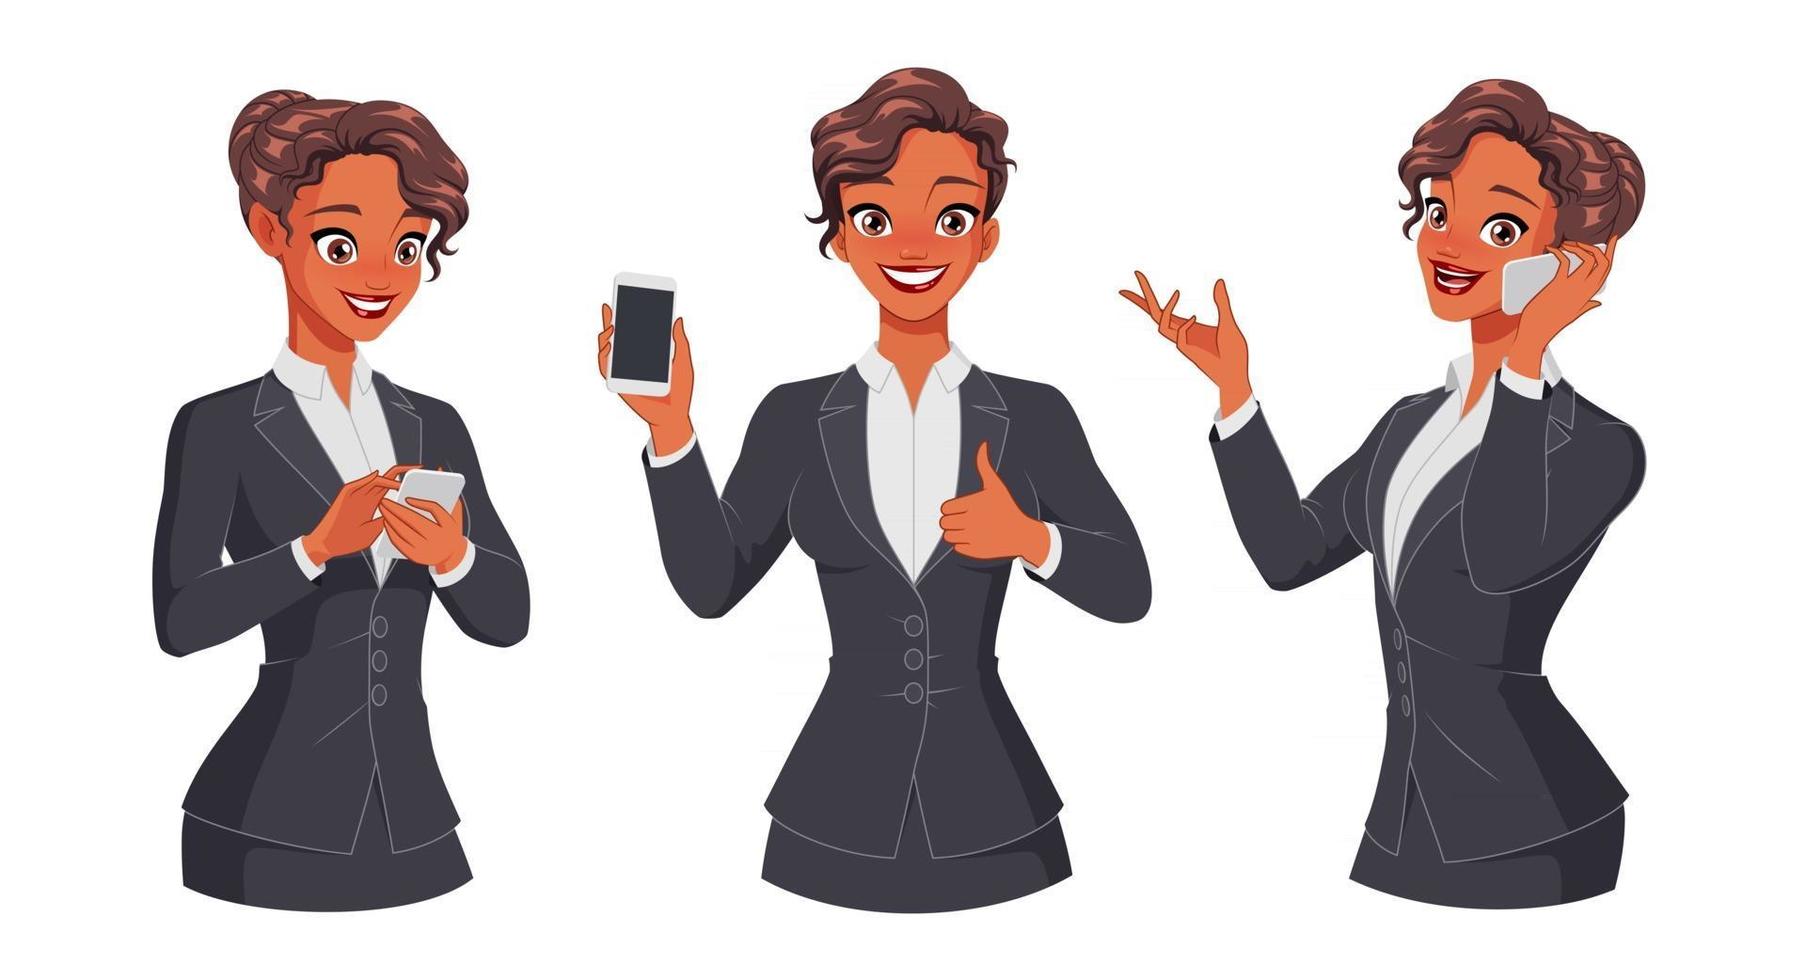 Woman texting calling showing thumb up with smartphone Full length under clipping mask Set of vector characters